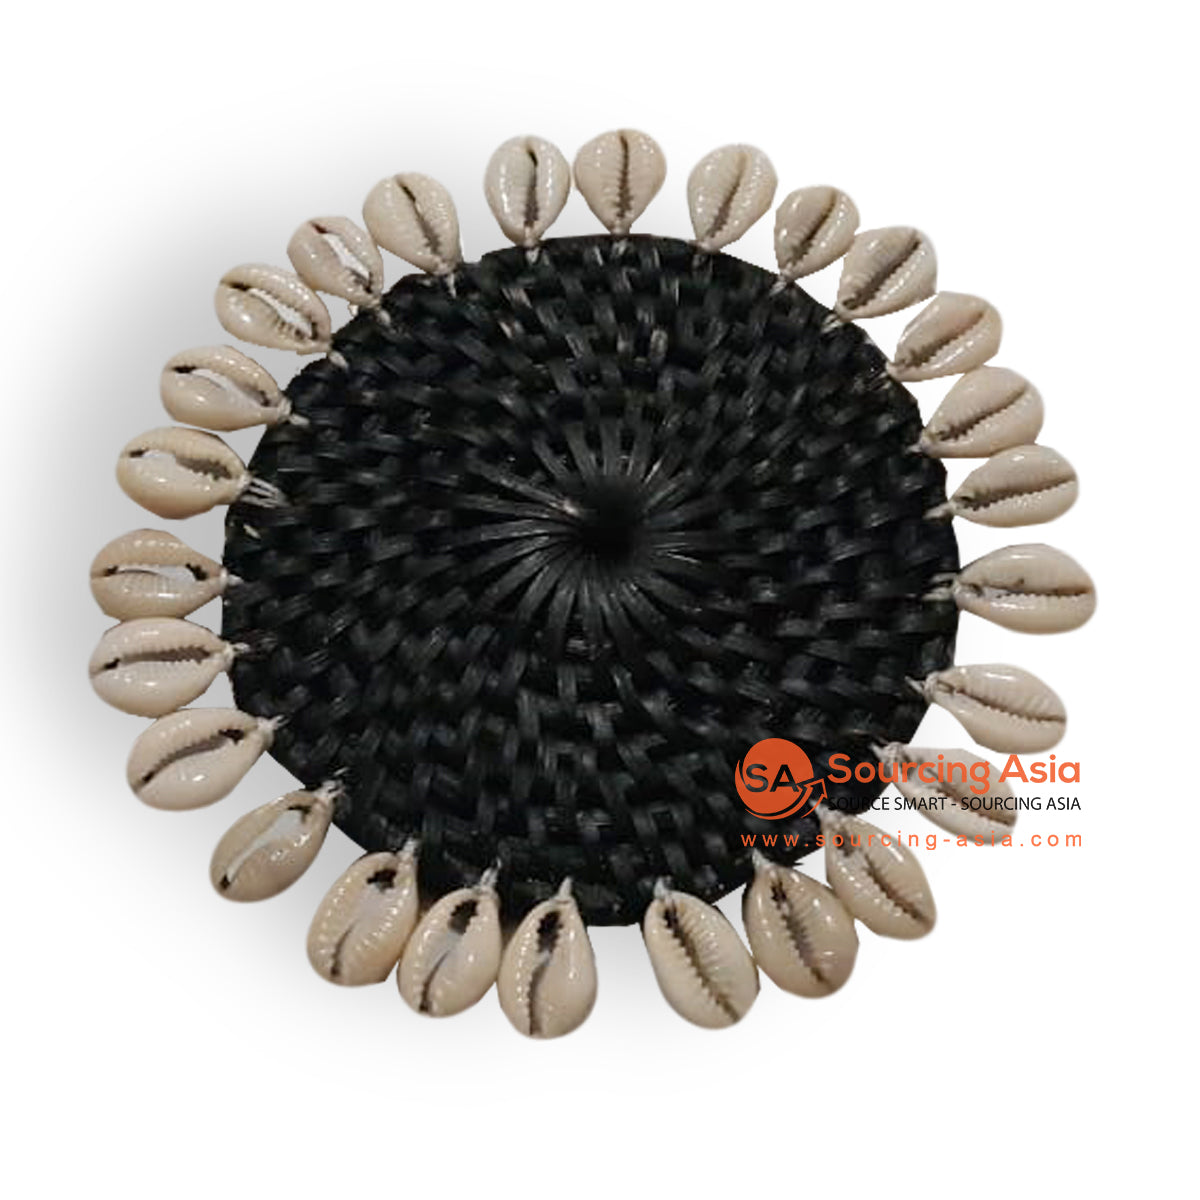 ALI064 BLACK RATTAN ROUND PLACEMAT WITH SHELL